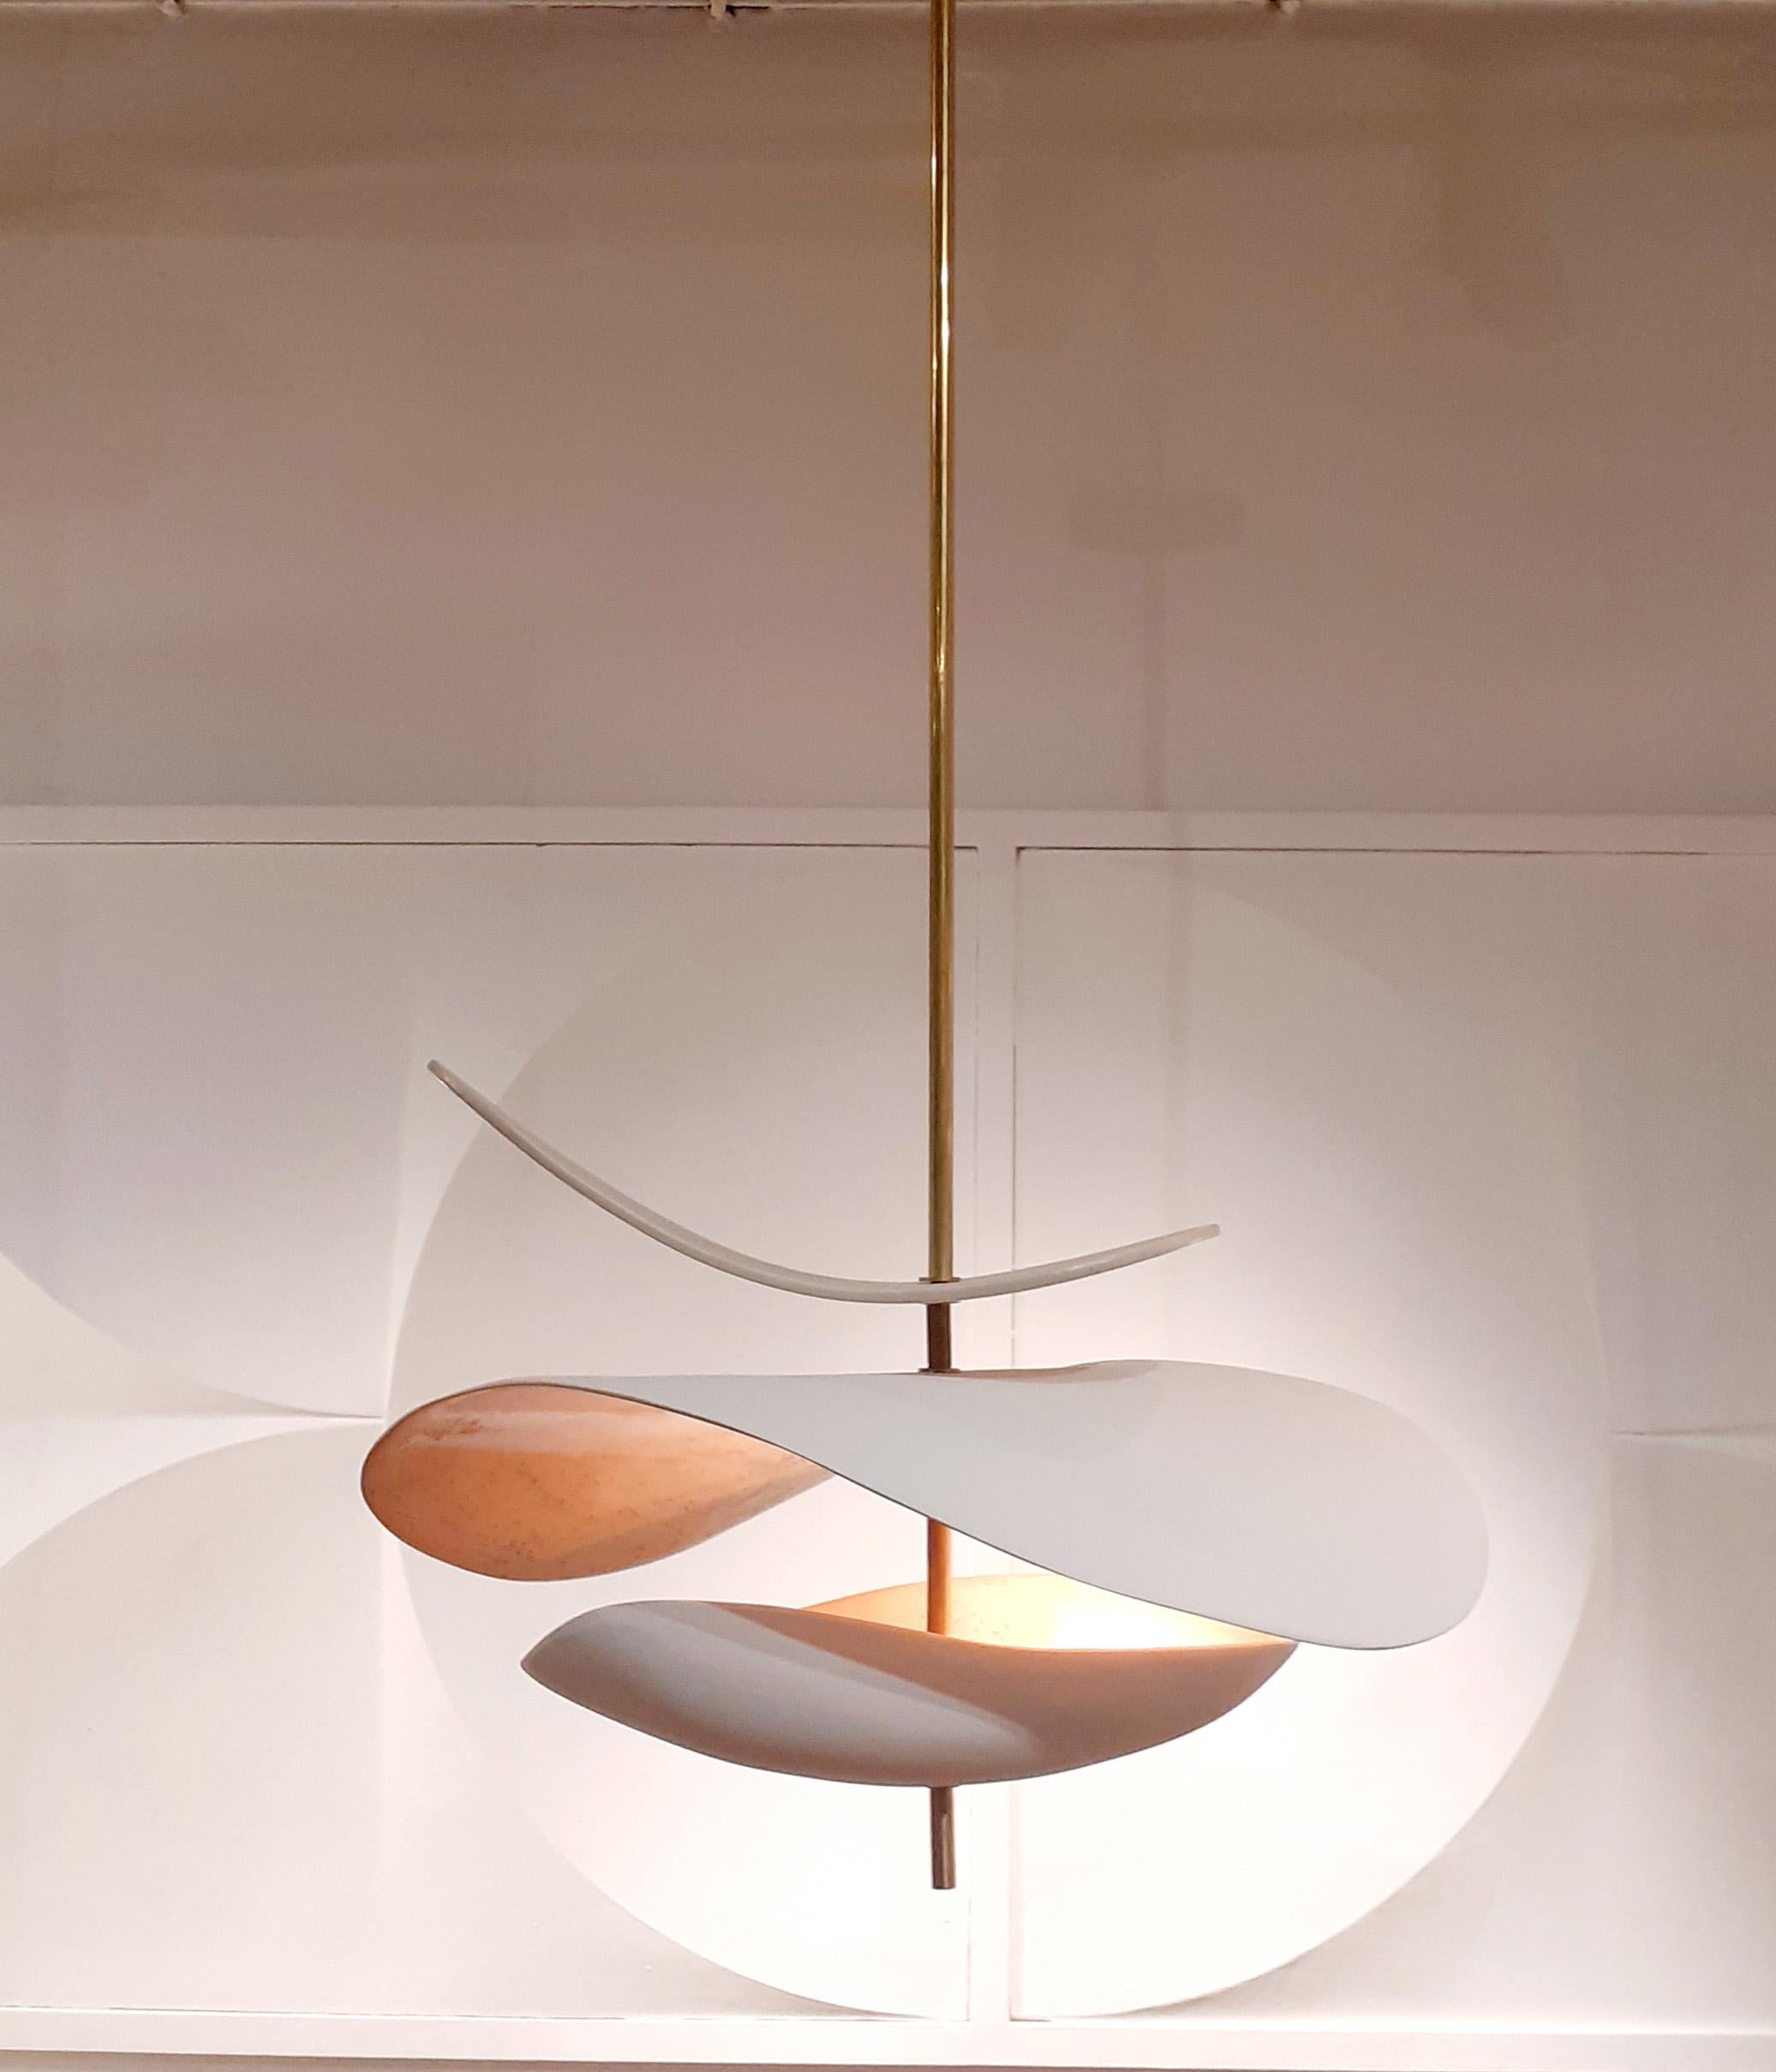 Sculptural ceramic suspension.
Poetic and organic design handmade by Elsa Foulon Studio in her Parisian workshop.
Enameled ceramic, brass structure.
The size of the ceramic part can be customized ( max lenght : 29.5 Inch - additional cost )
Two